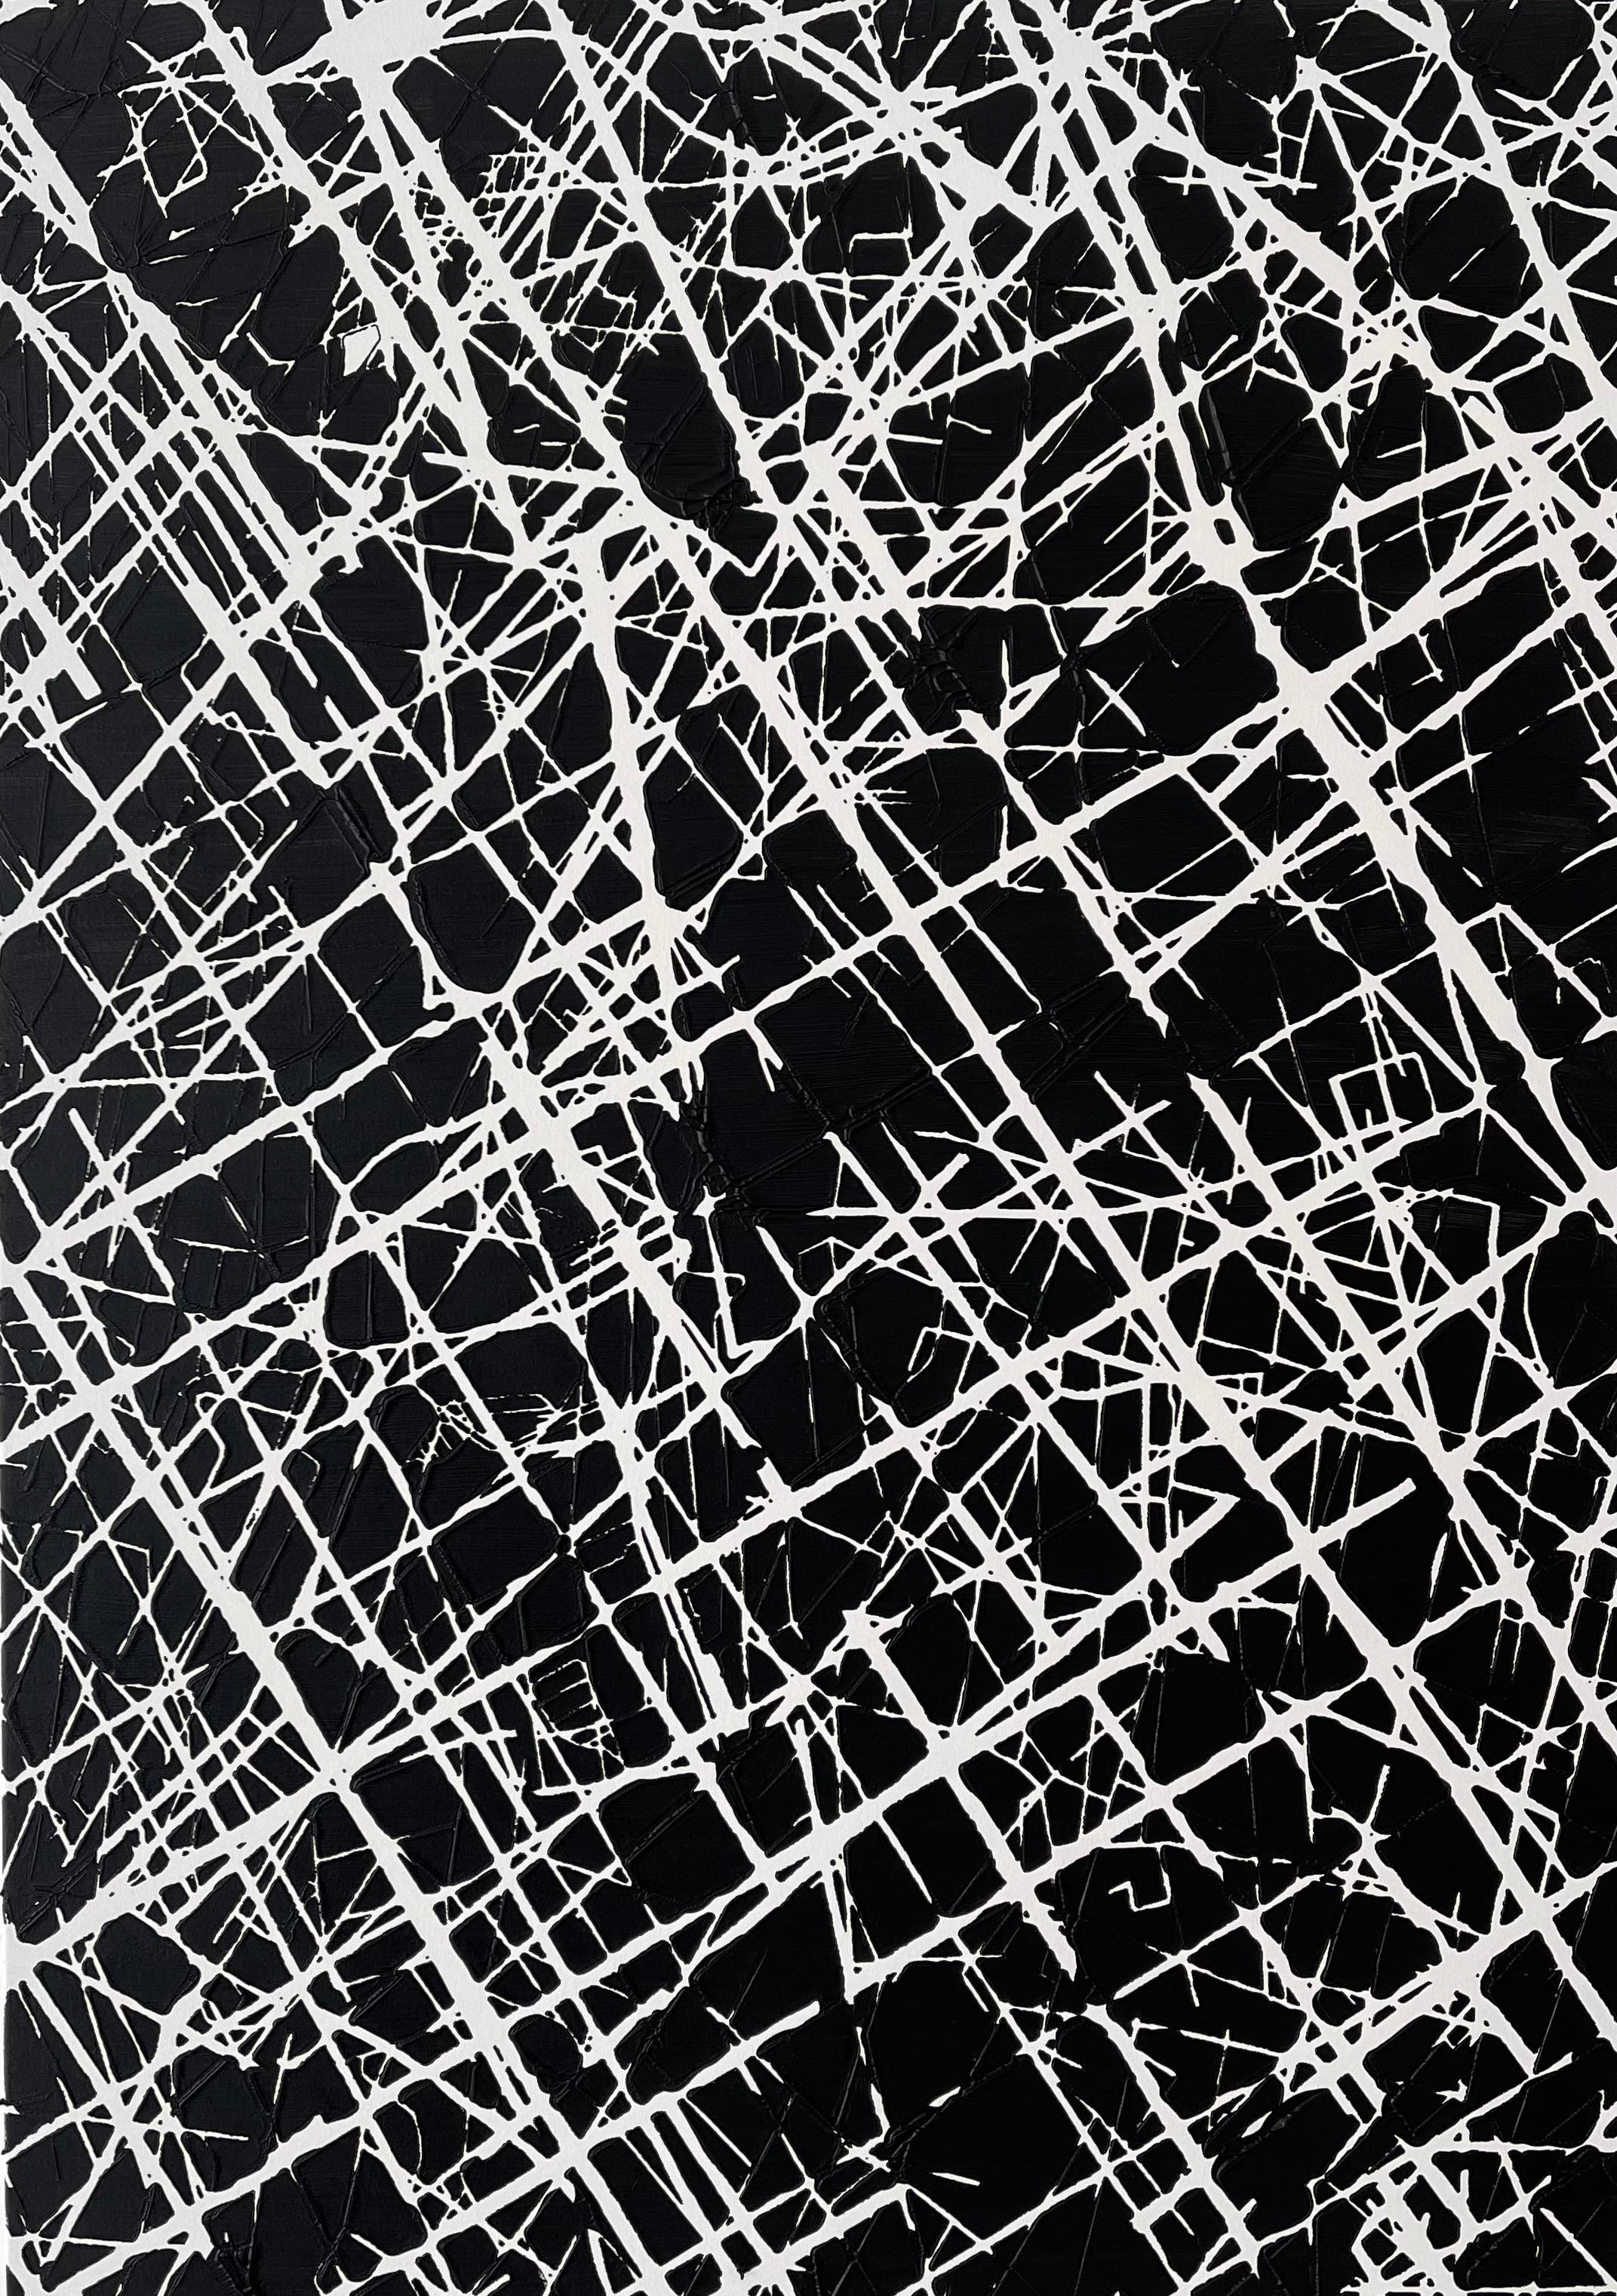 Stanza Landscape Painting - Control Revisited- Contemporary Abstract Art Oil Painting Black and White